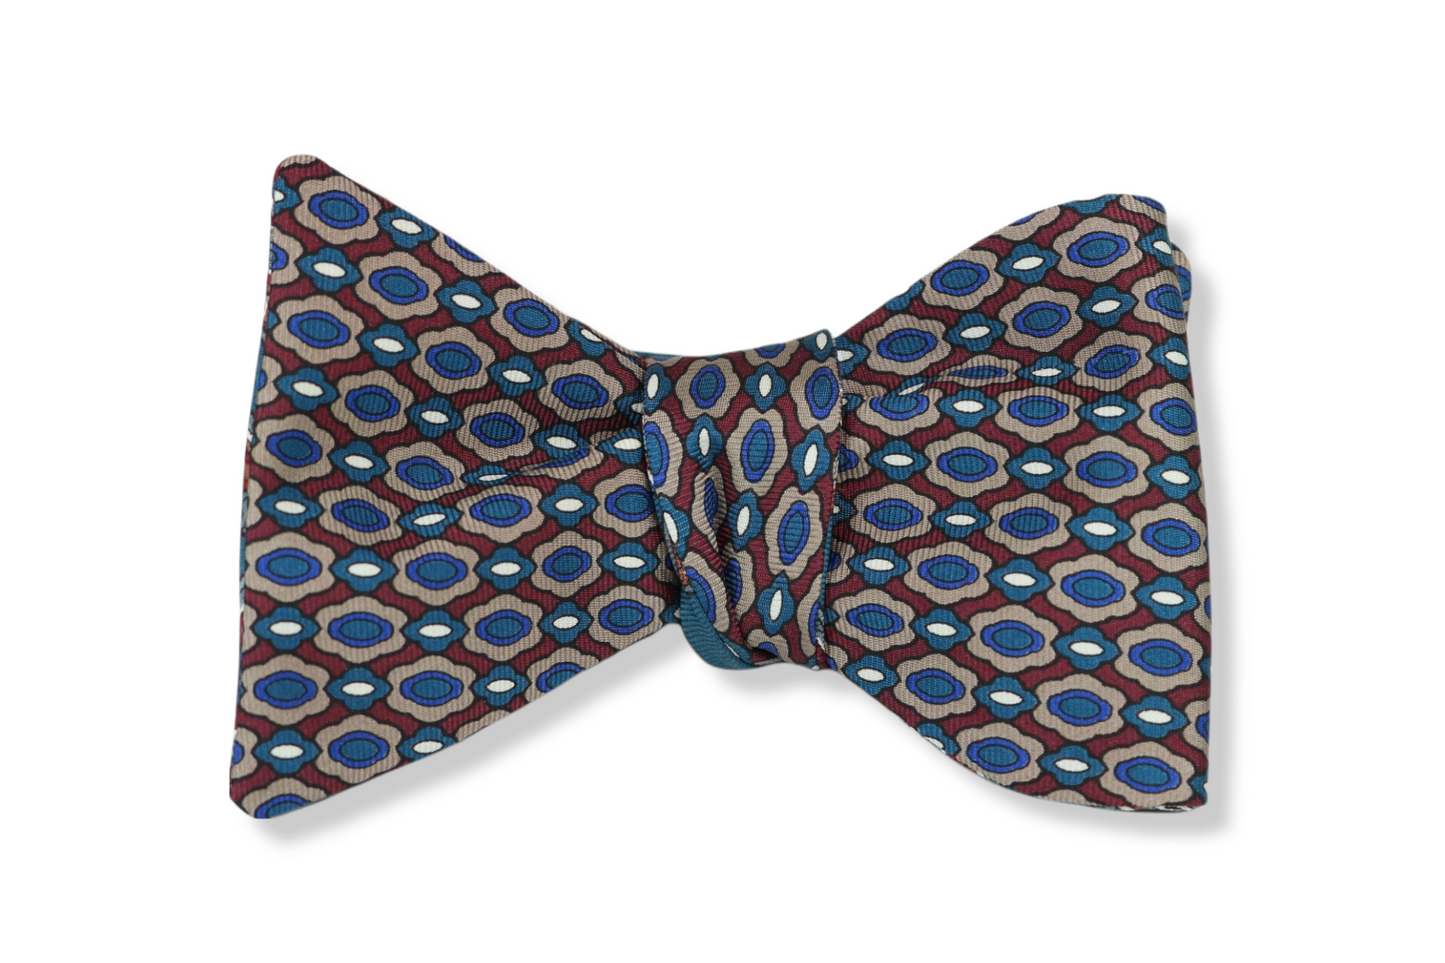 Rio Branco Reversible Butterfly Bow Tie